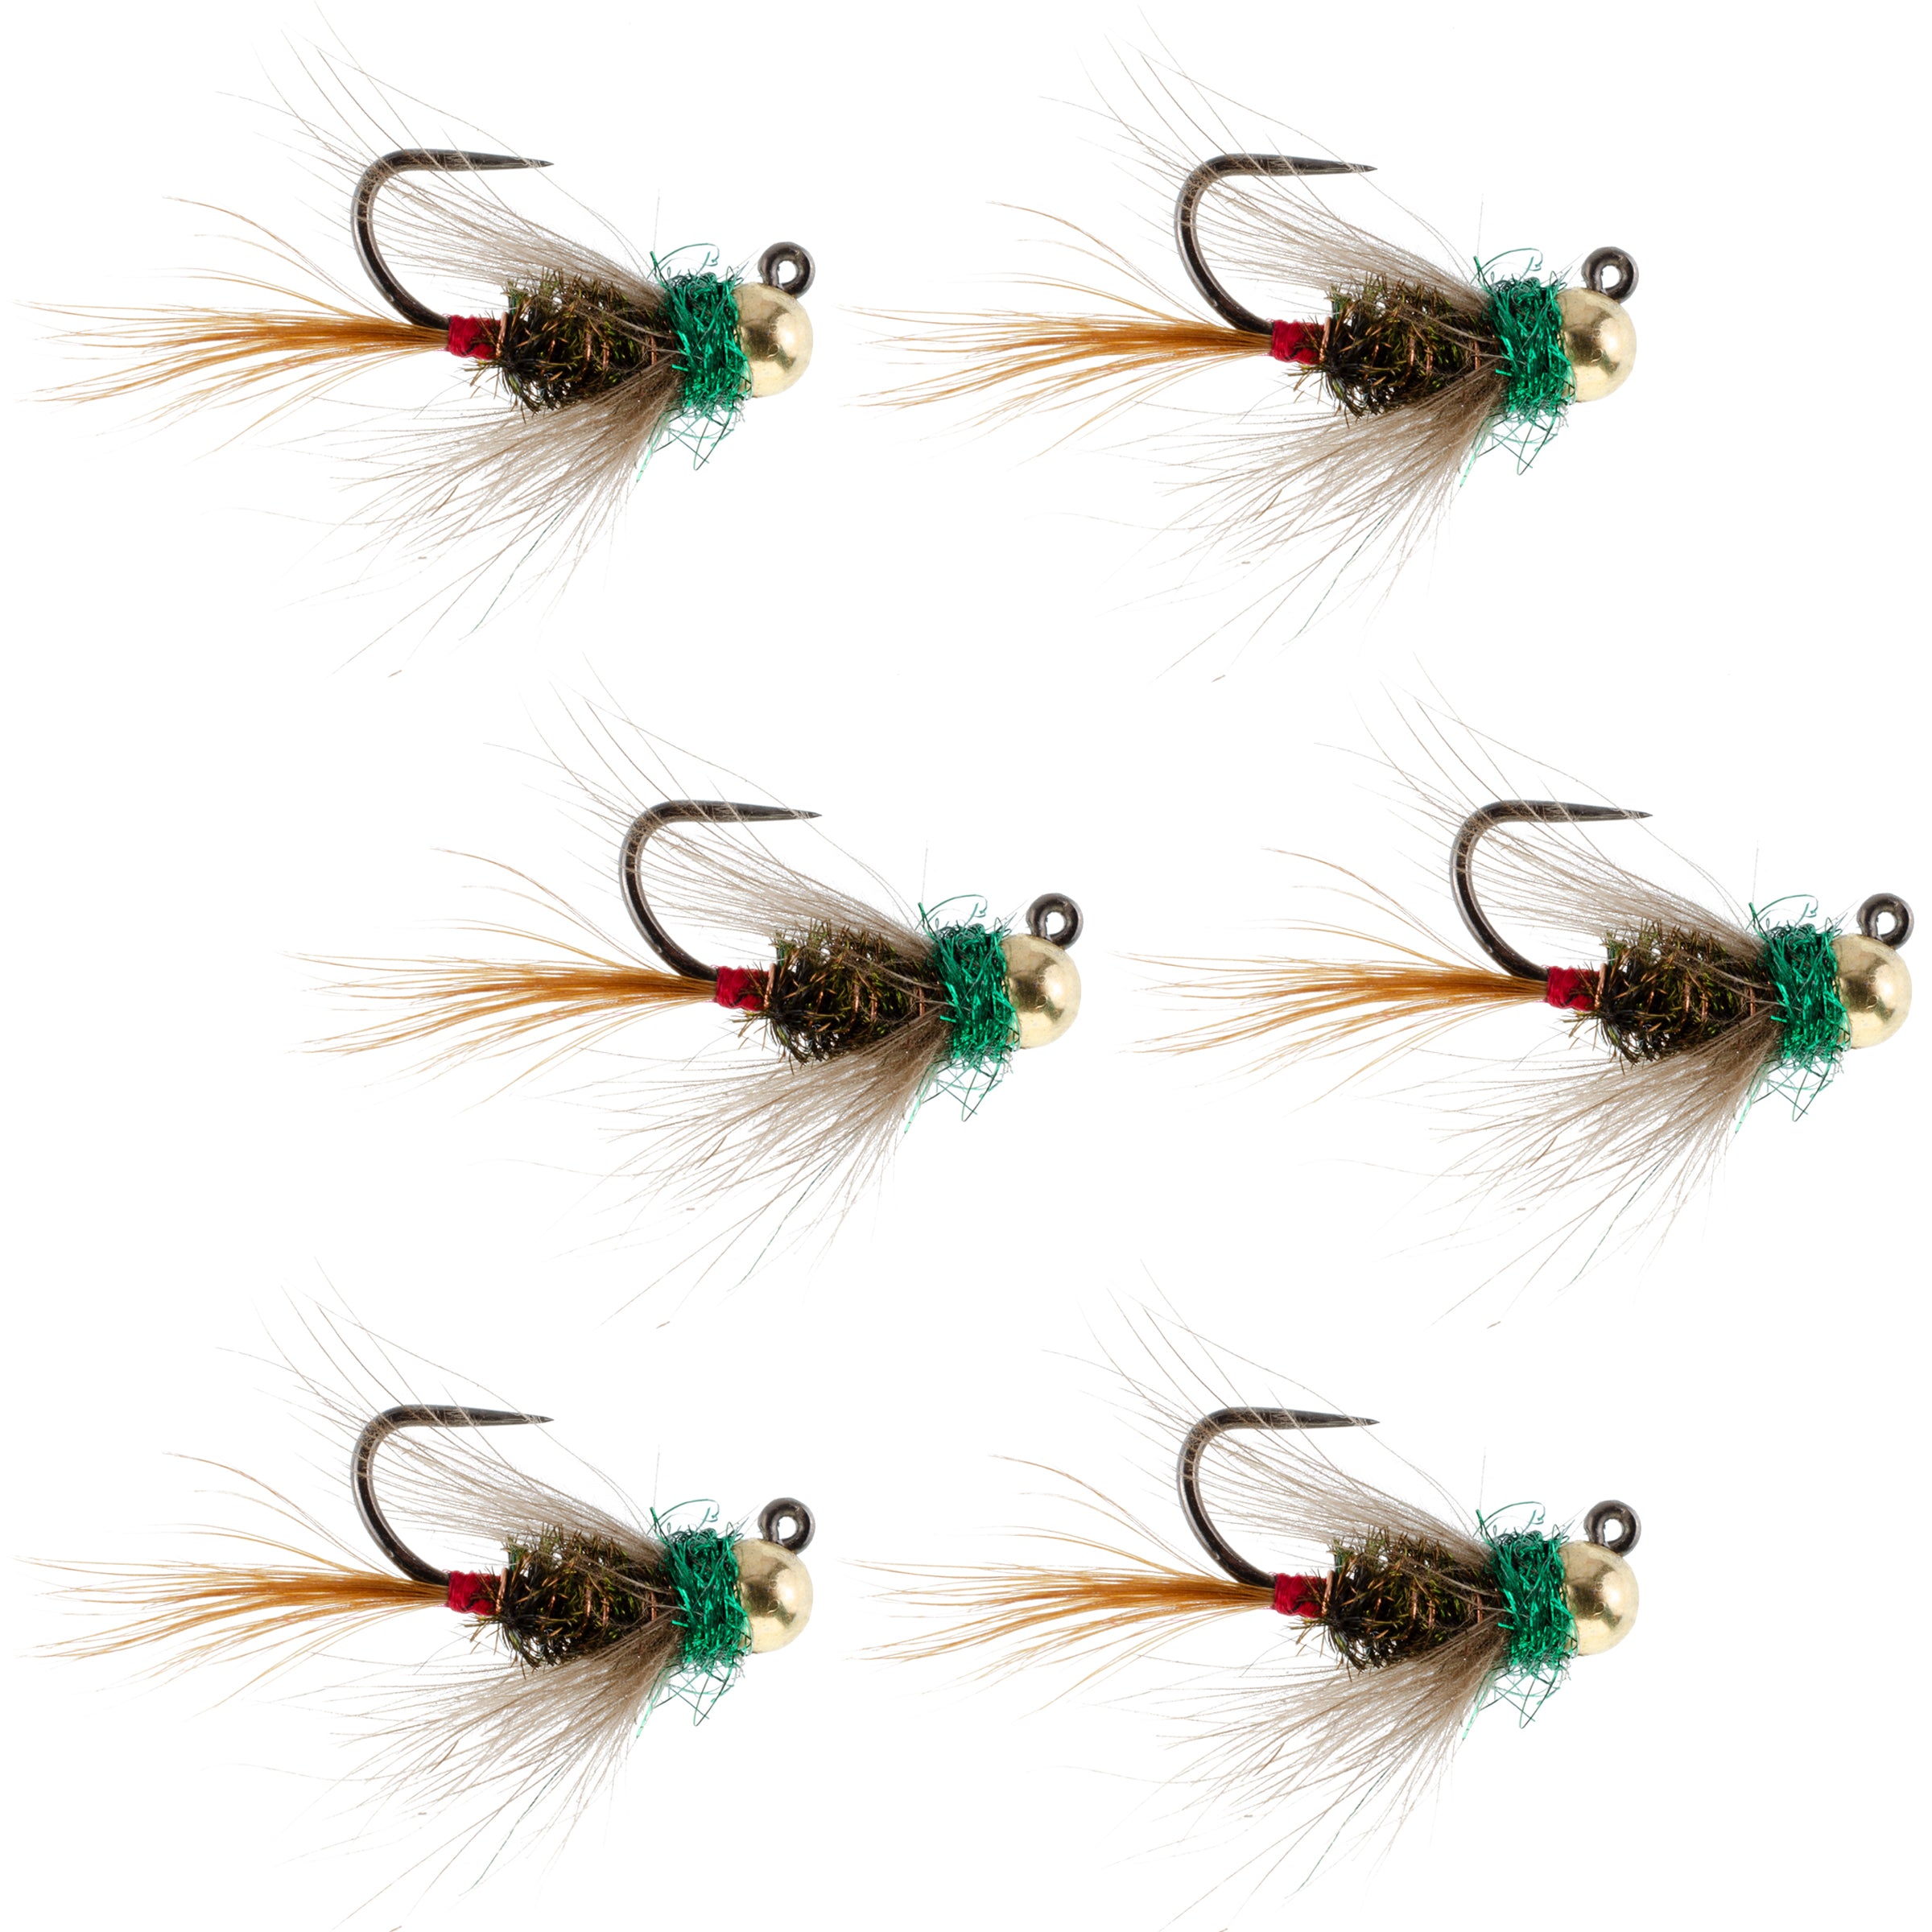 Tungsten Bead Tactical CDC Frenchie Czech Nymph Euro Nymphing Fly - 6 Flies Size 12